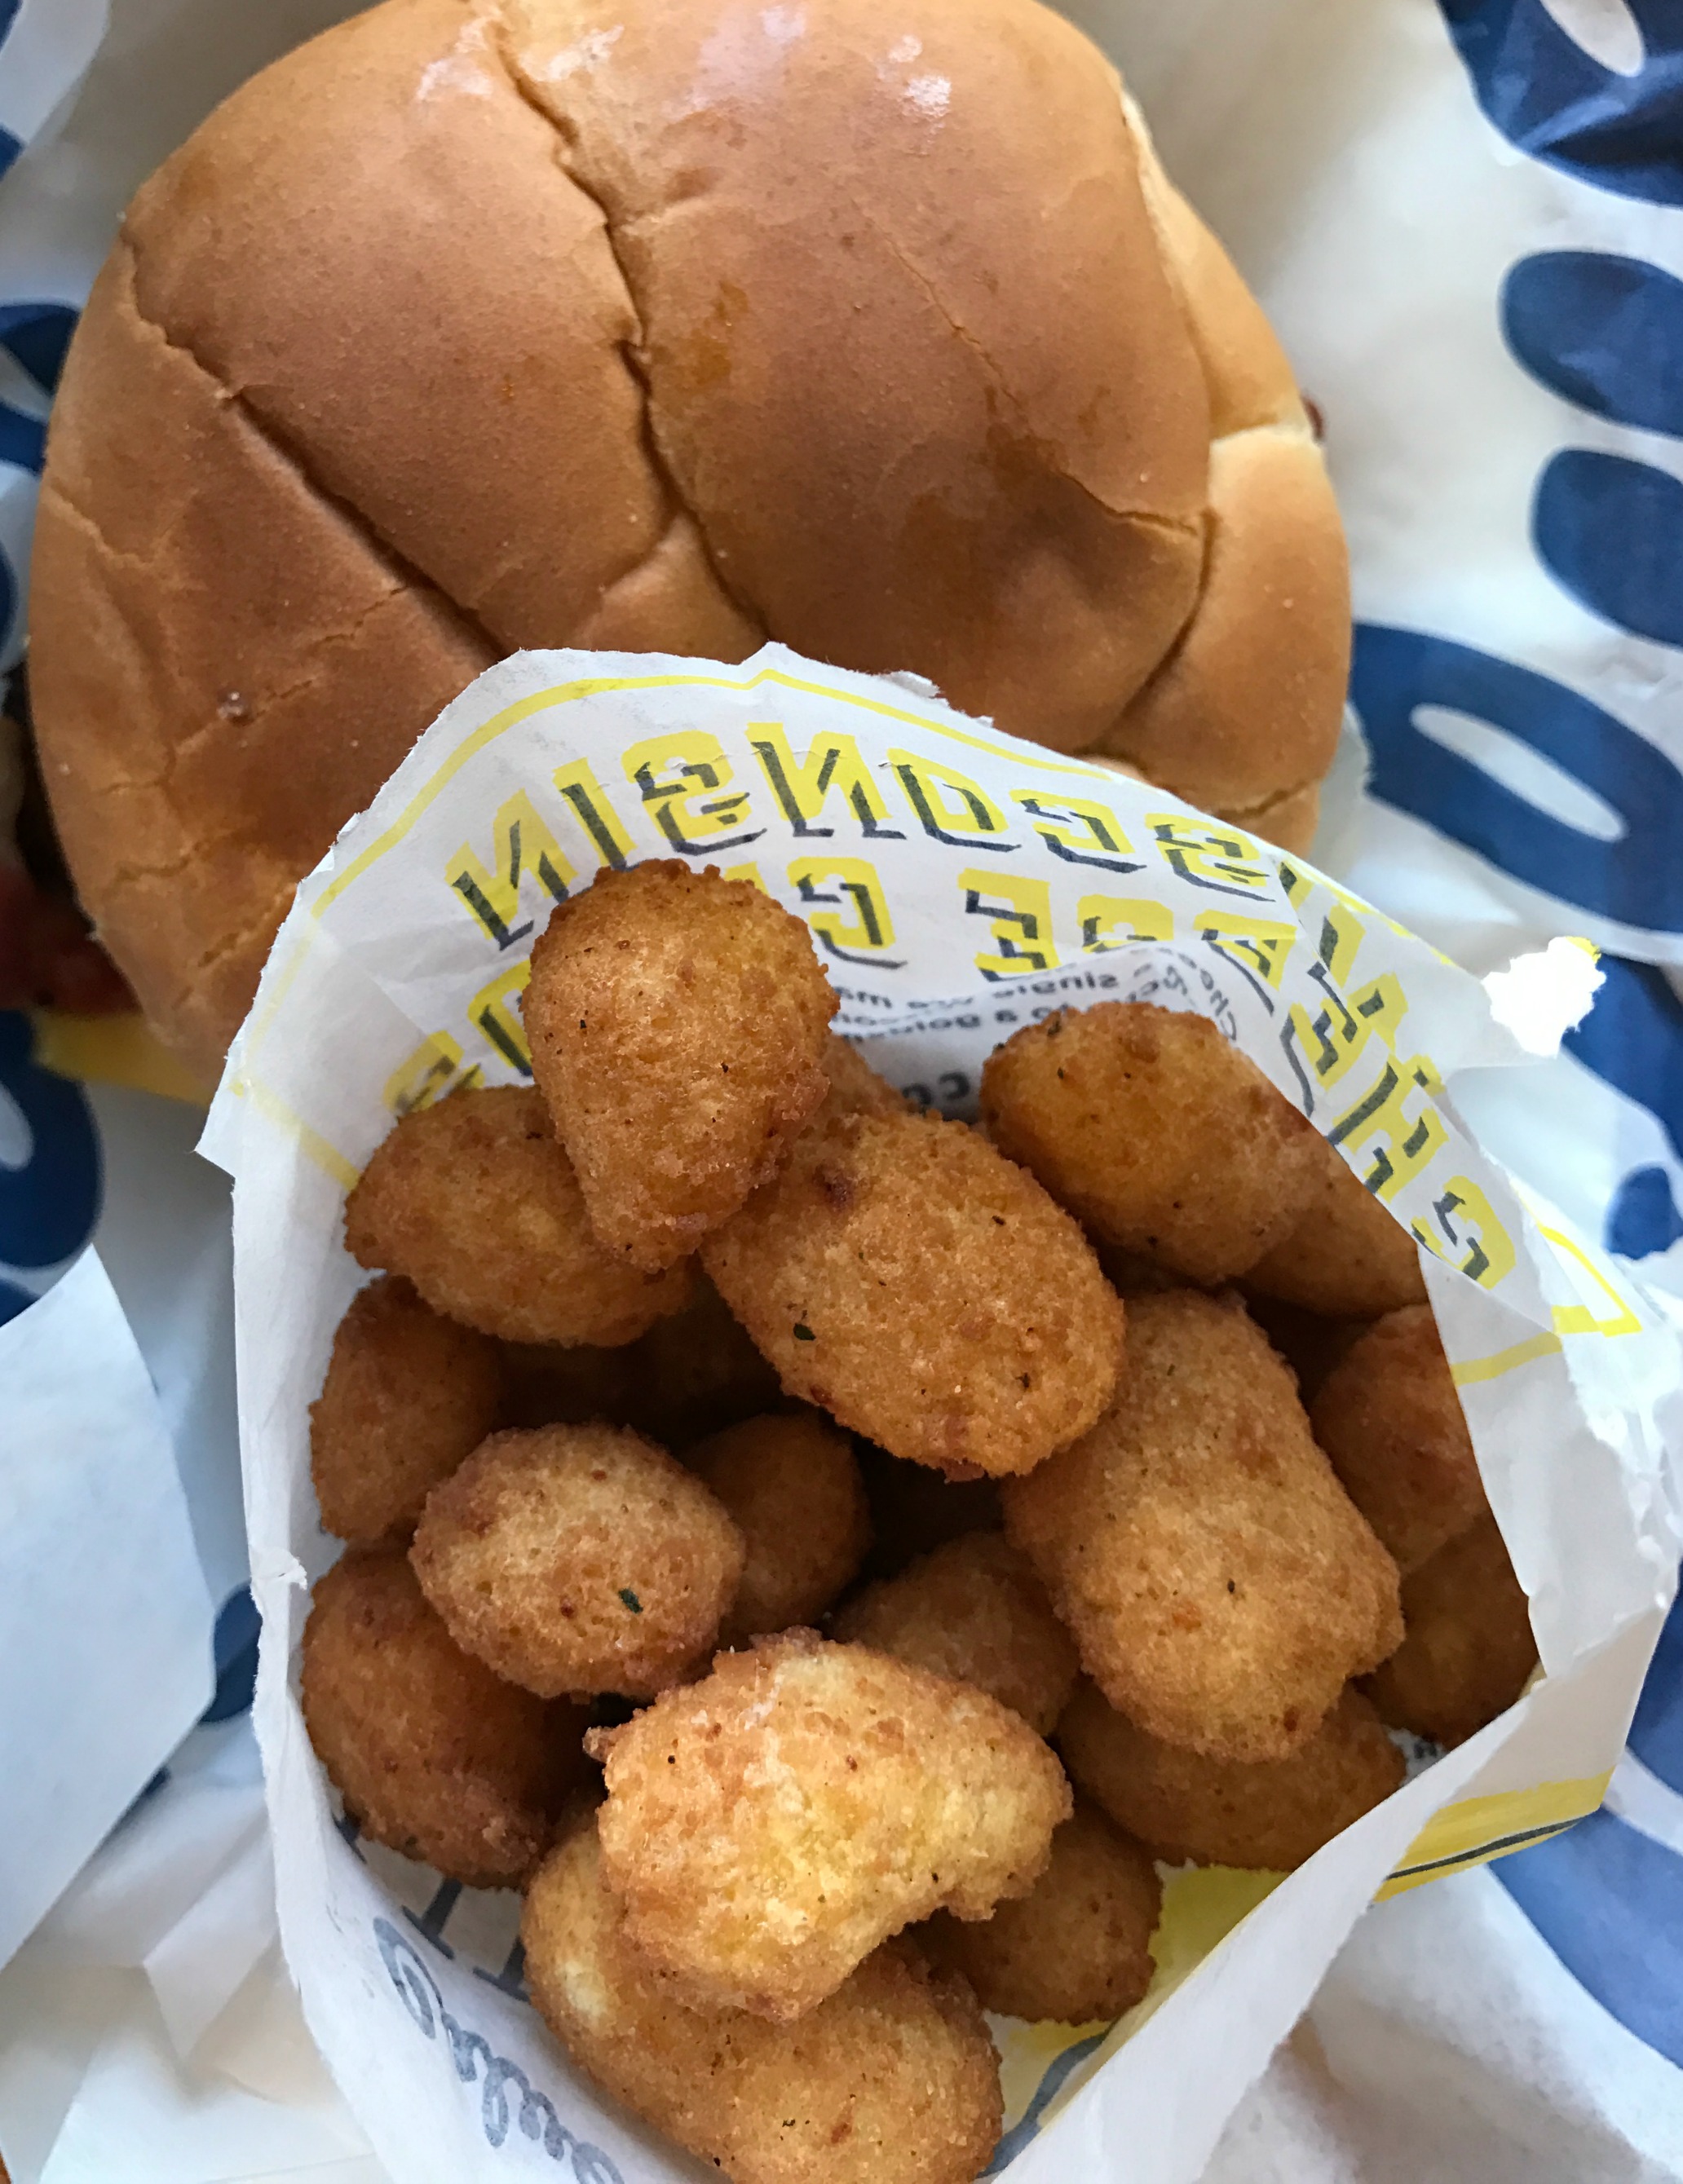 Culvers-national-cheese-curd-day-giveaway-butterburger